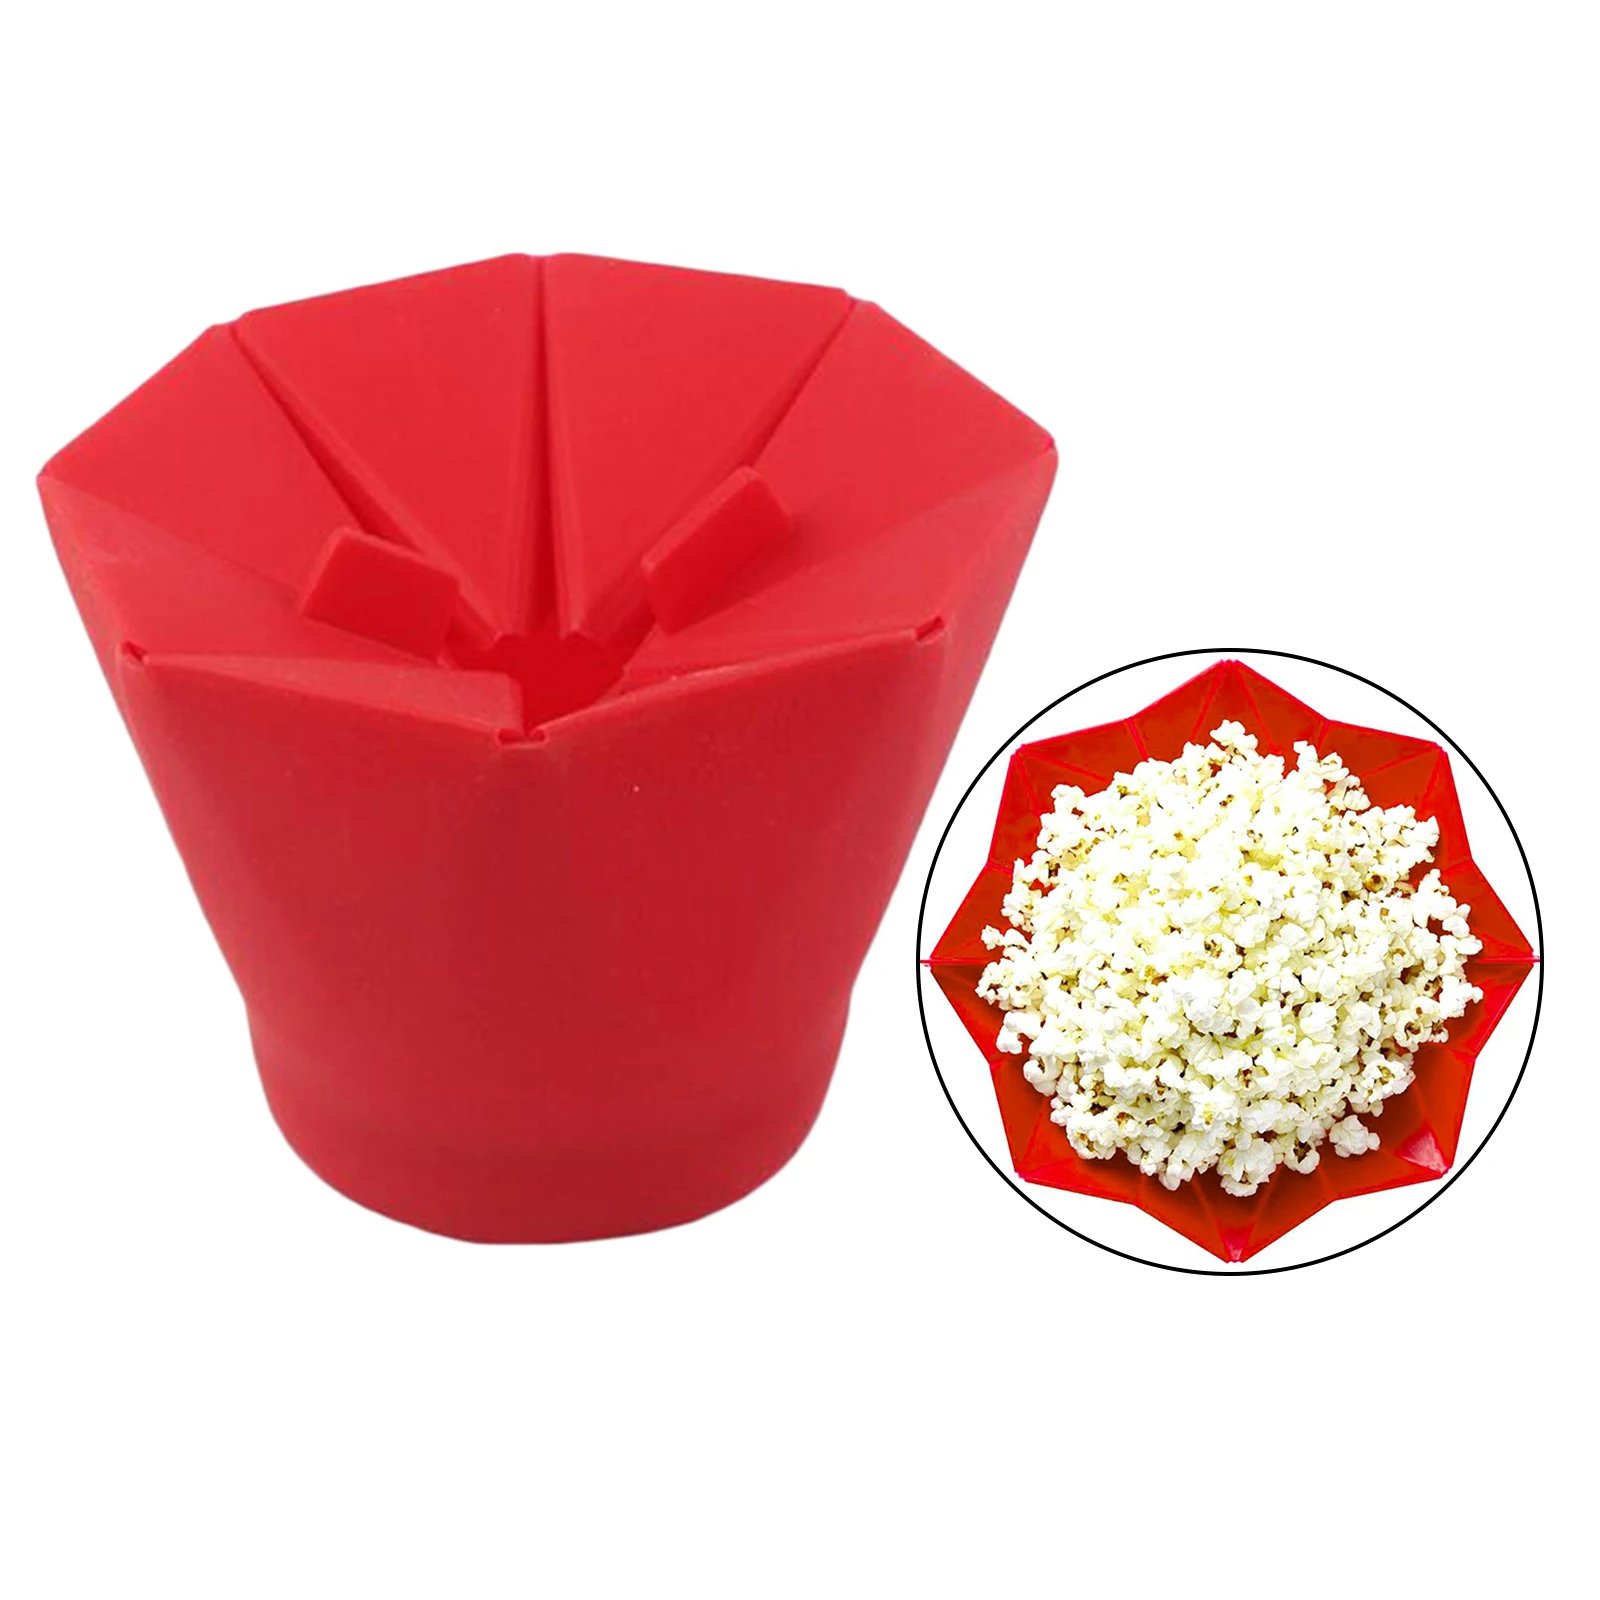 Silicone Microwave Popcorn Maker Folding Bowl Popcorn Bucket Kitchen Cooking Accessory Red Popcorn Bucket Bowl Maker